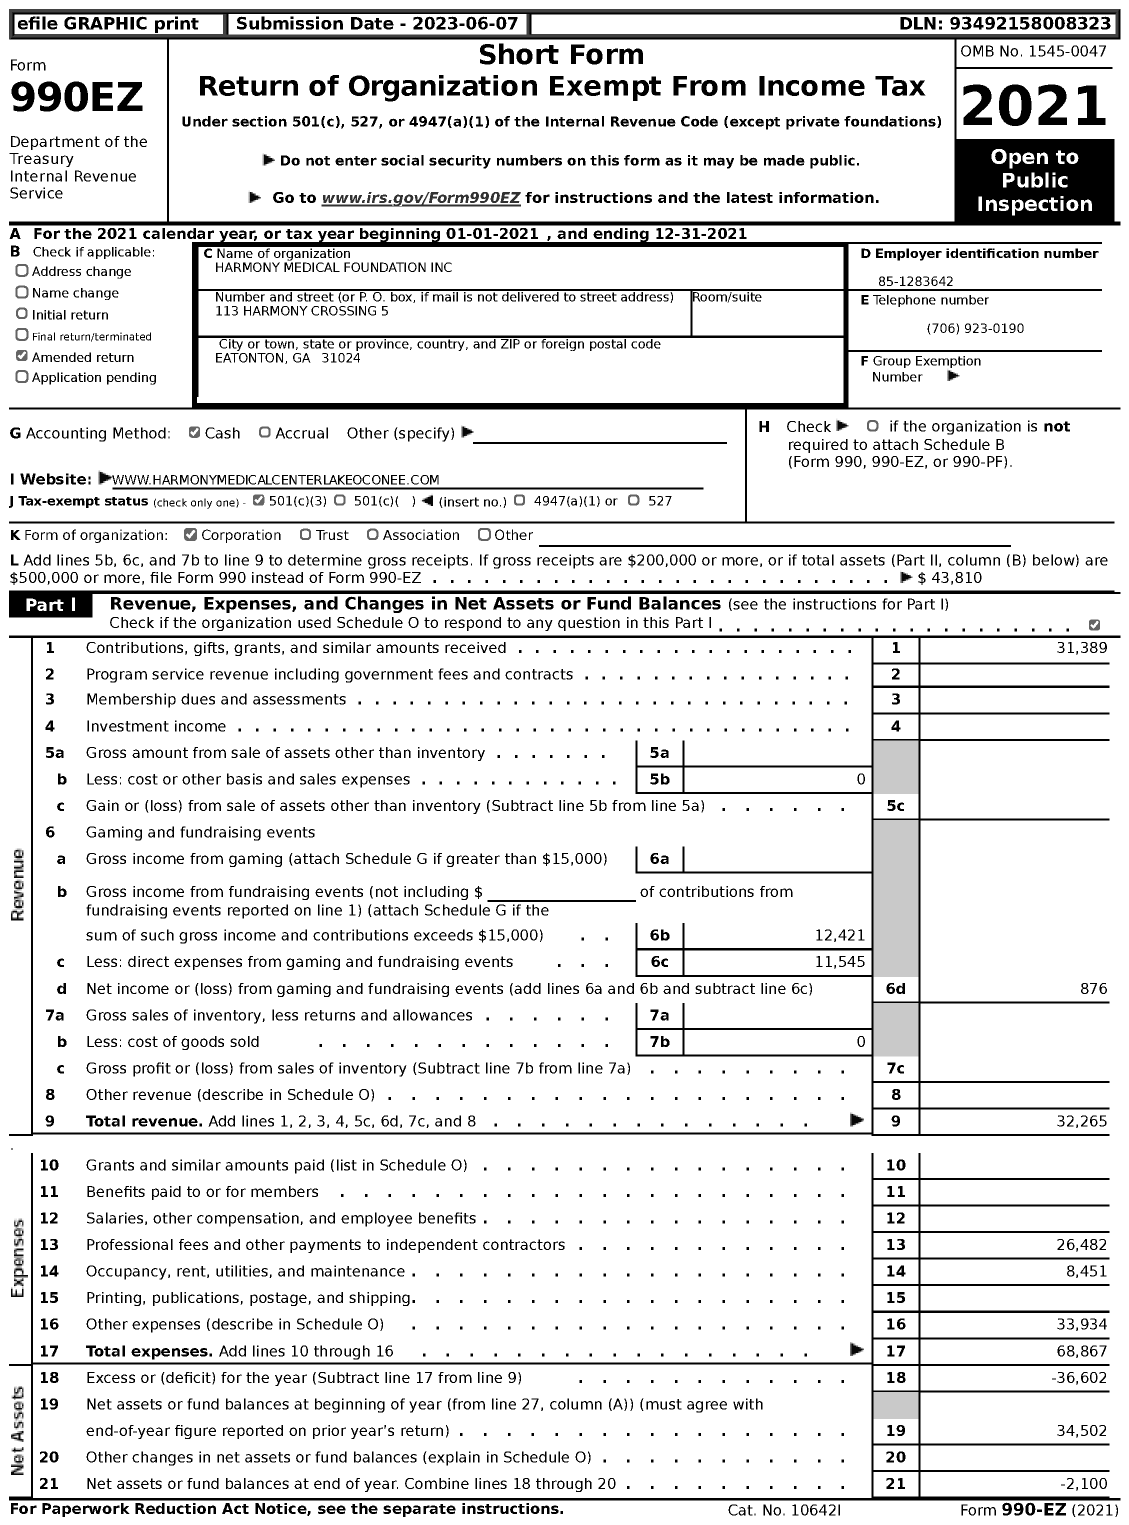 Image of first page of 2021 Form 990EZ for Harmony Medical Foundation